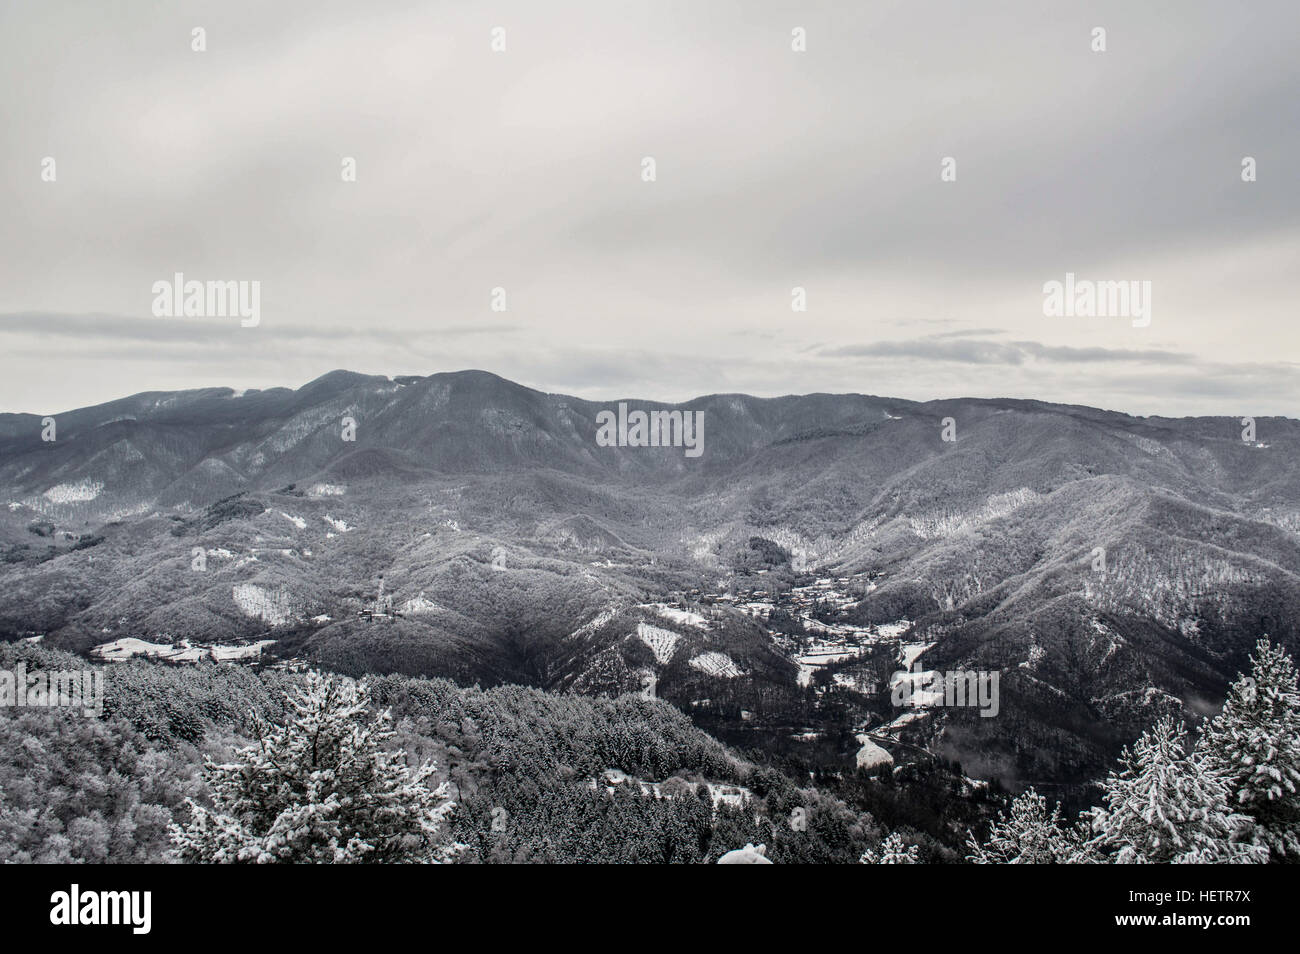 Almost a natural black and white landscape of the snowy mountains between Tuscany and Emilia-Romagna. Stock Photo